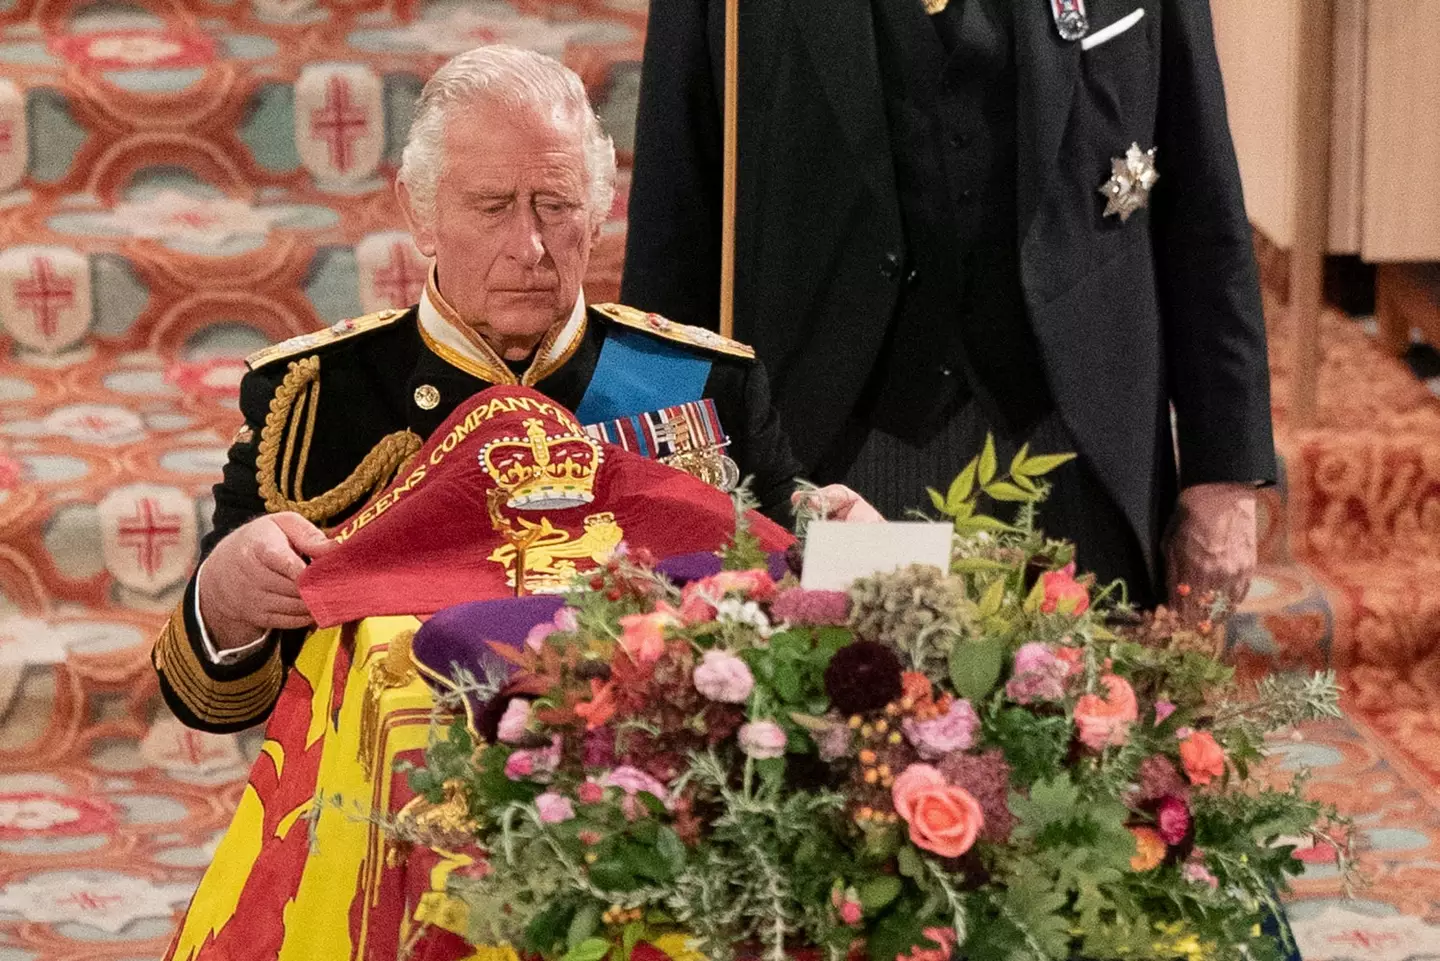 King Charles at Queen Elizabeth's funeral.